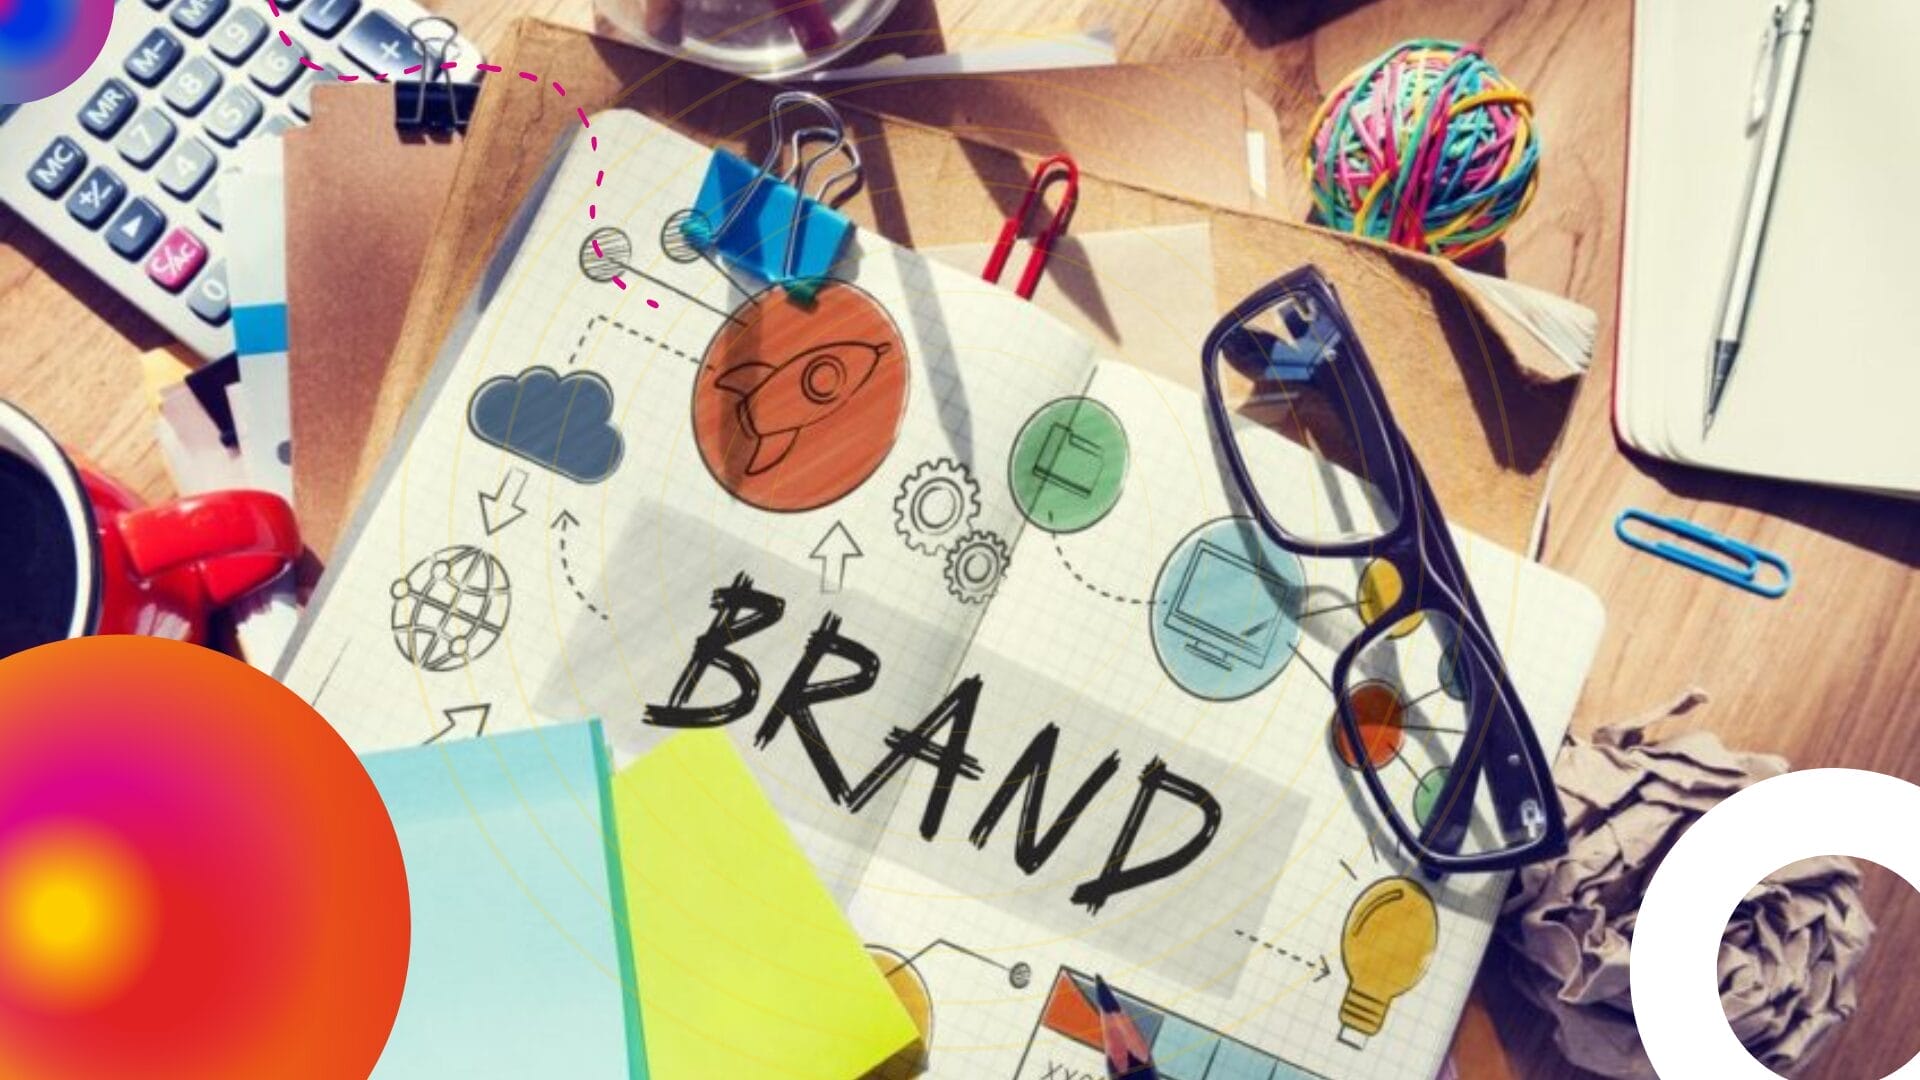 Building Brand Visibility and Authority